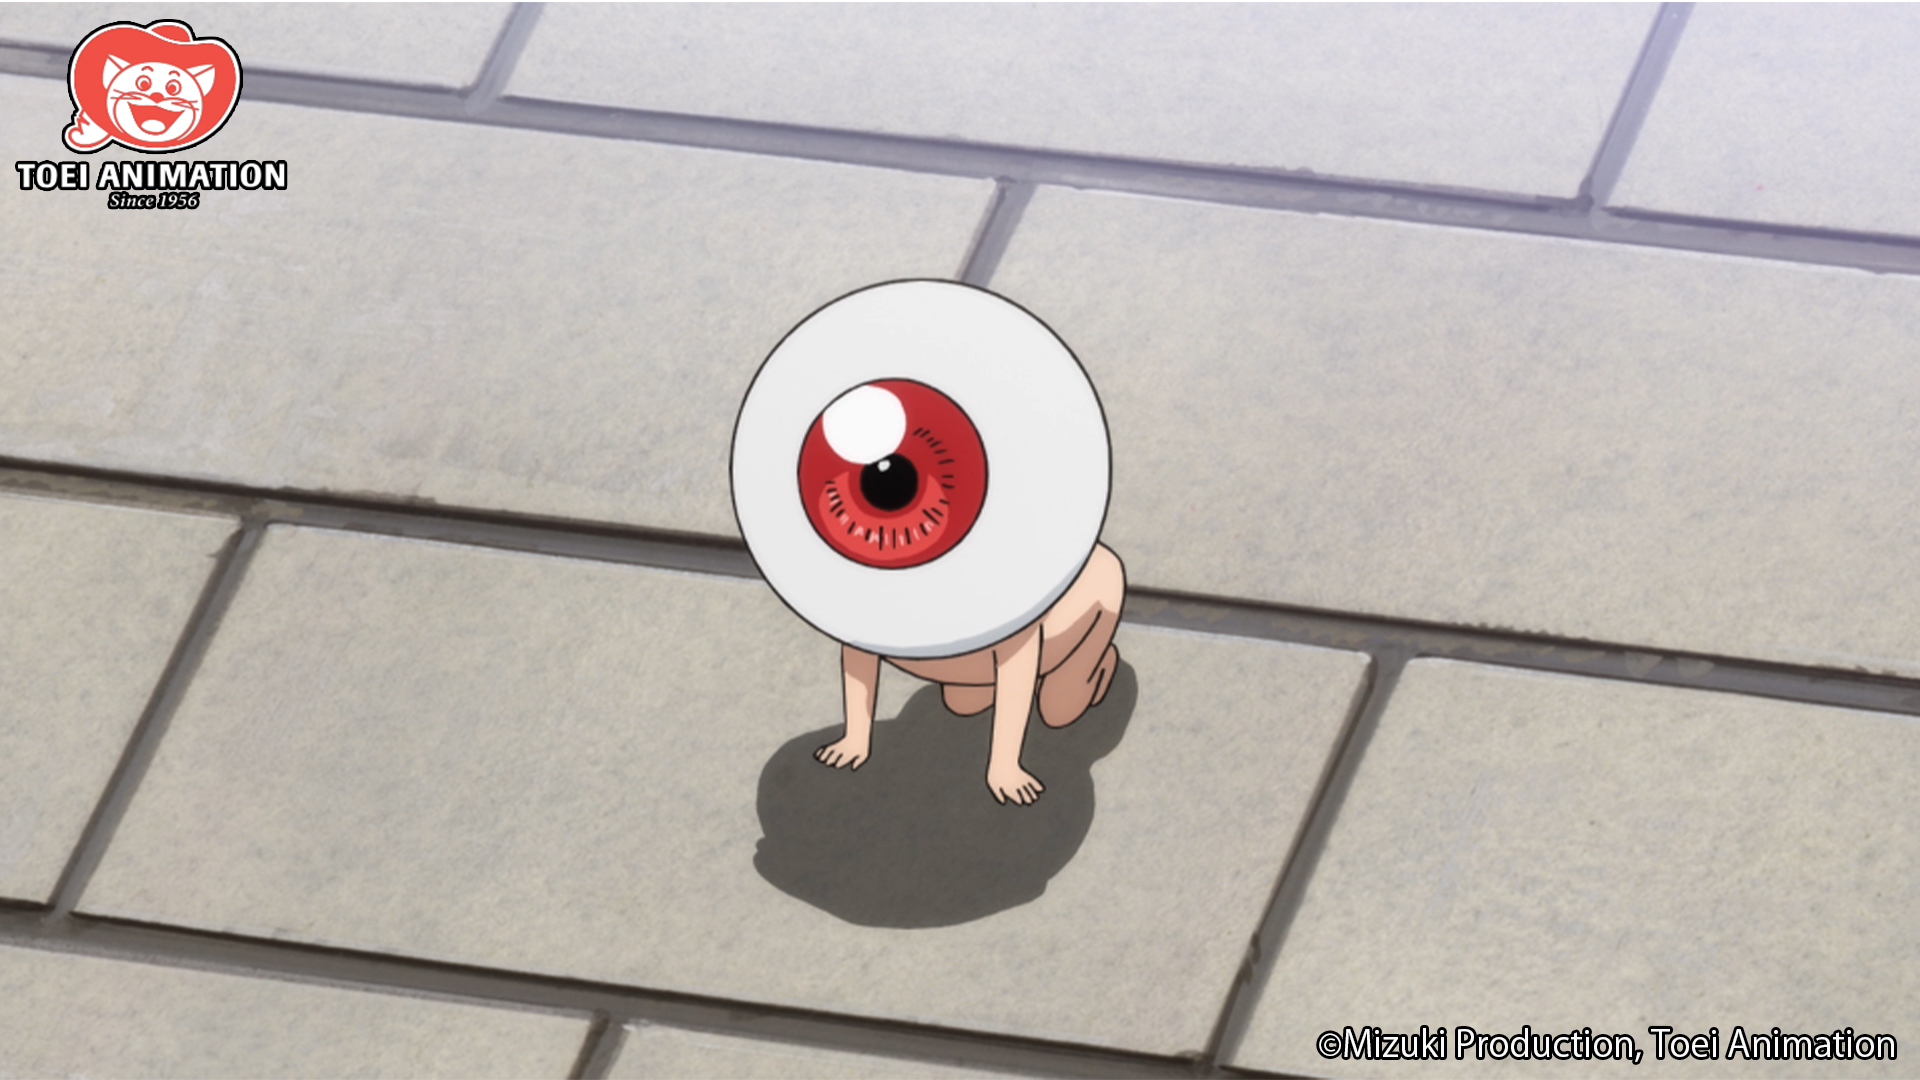 Medama-oyaji (aka "Daddy Eyeball") pleads for an end to the fighting a scene from the 2018 GeGeGe no Kitaro TV anime.